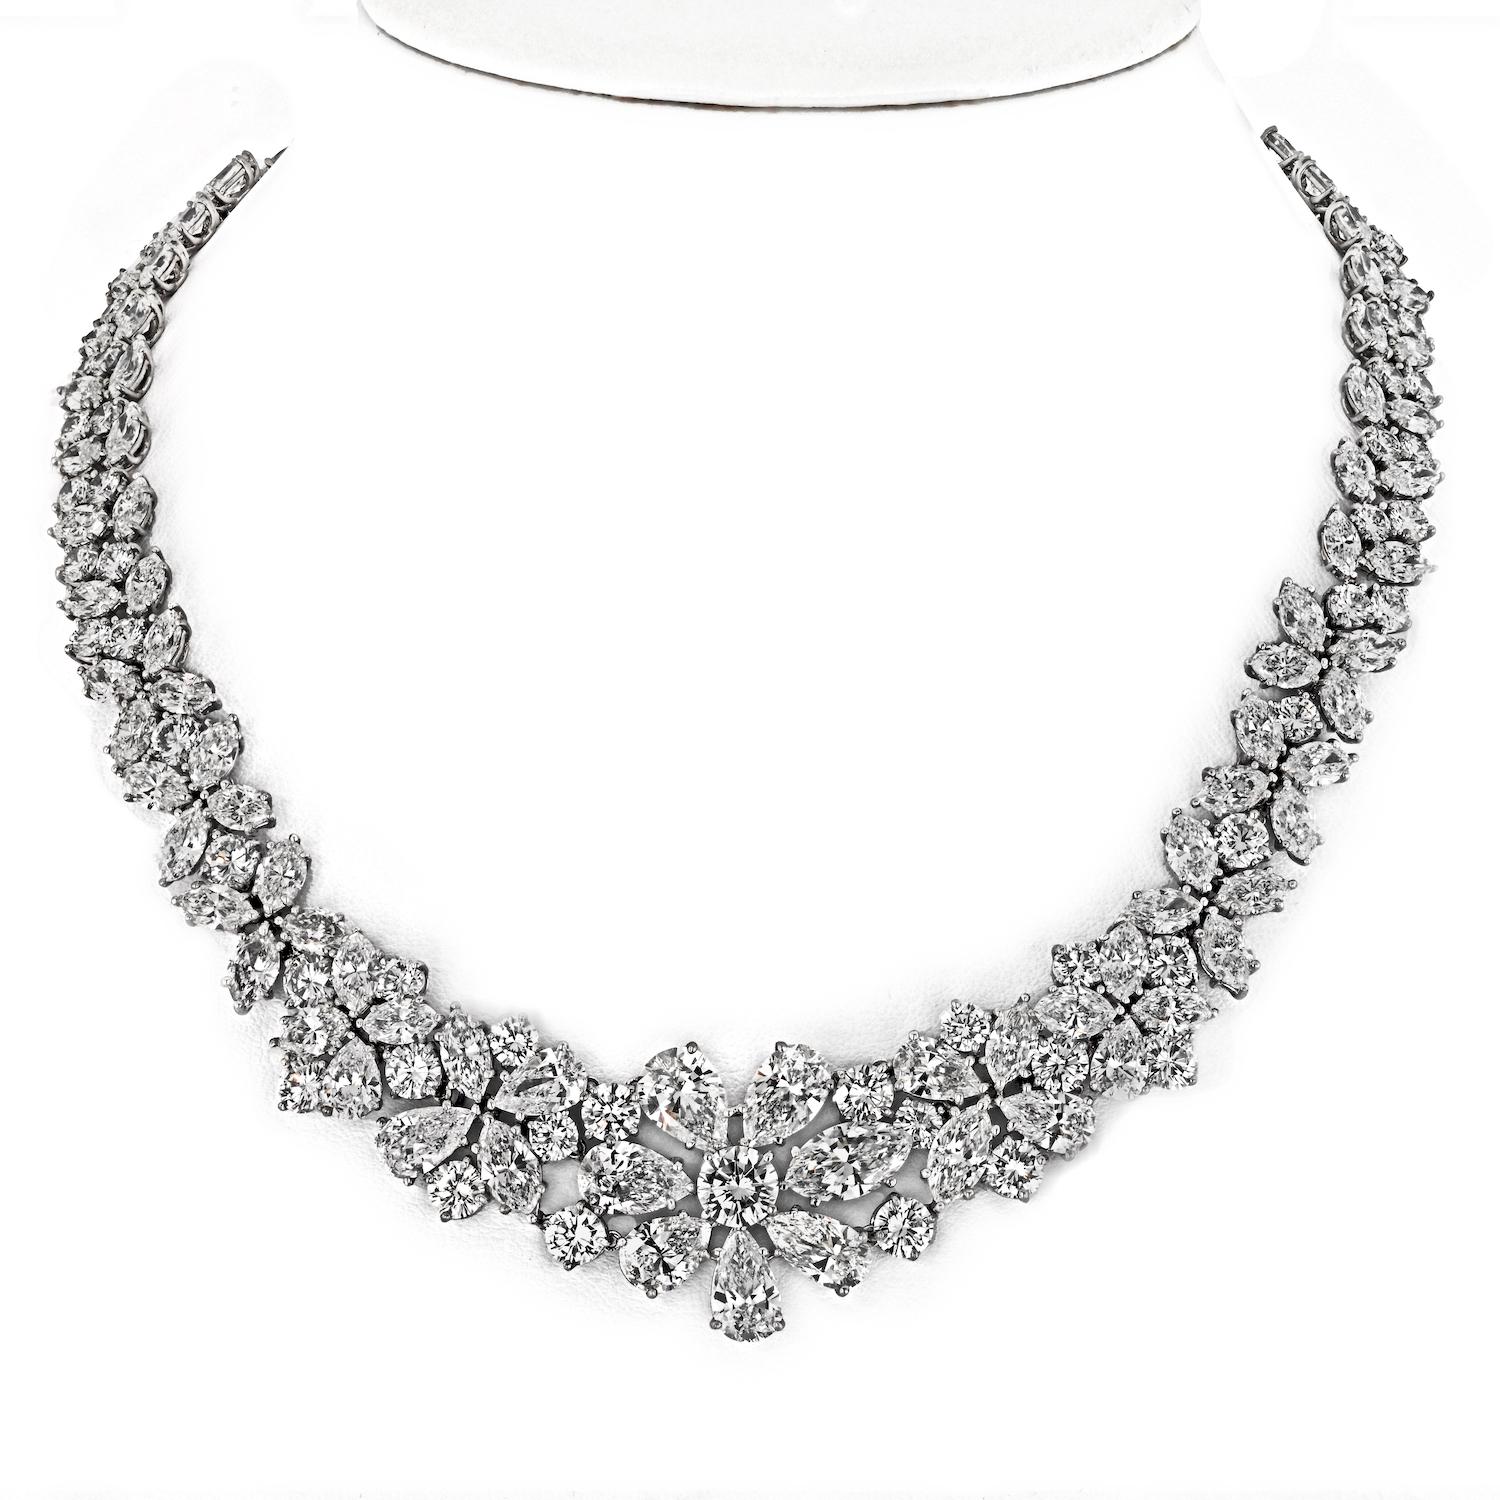 76 Carat Pear Cut, Marquise Cut, and Round Cut Diamond Collar Platinum Necklace For Sale 2